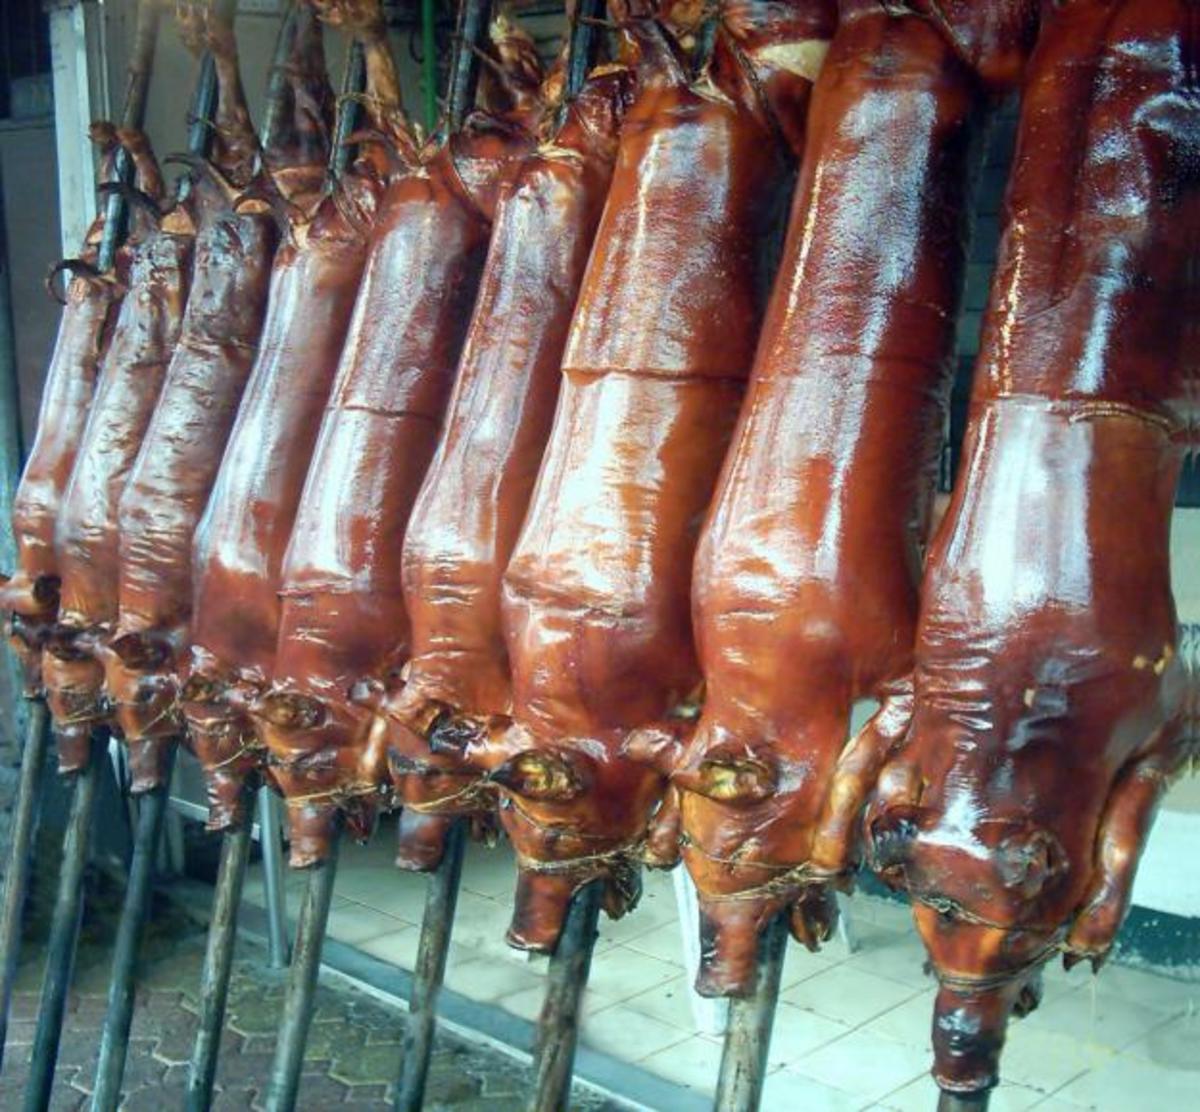 Rows of Cebu lechon are sometimes airlifted to different parts of the Philippines for various events.